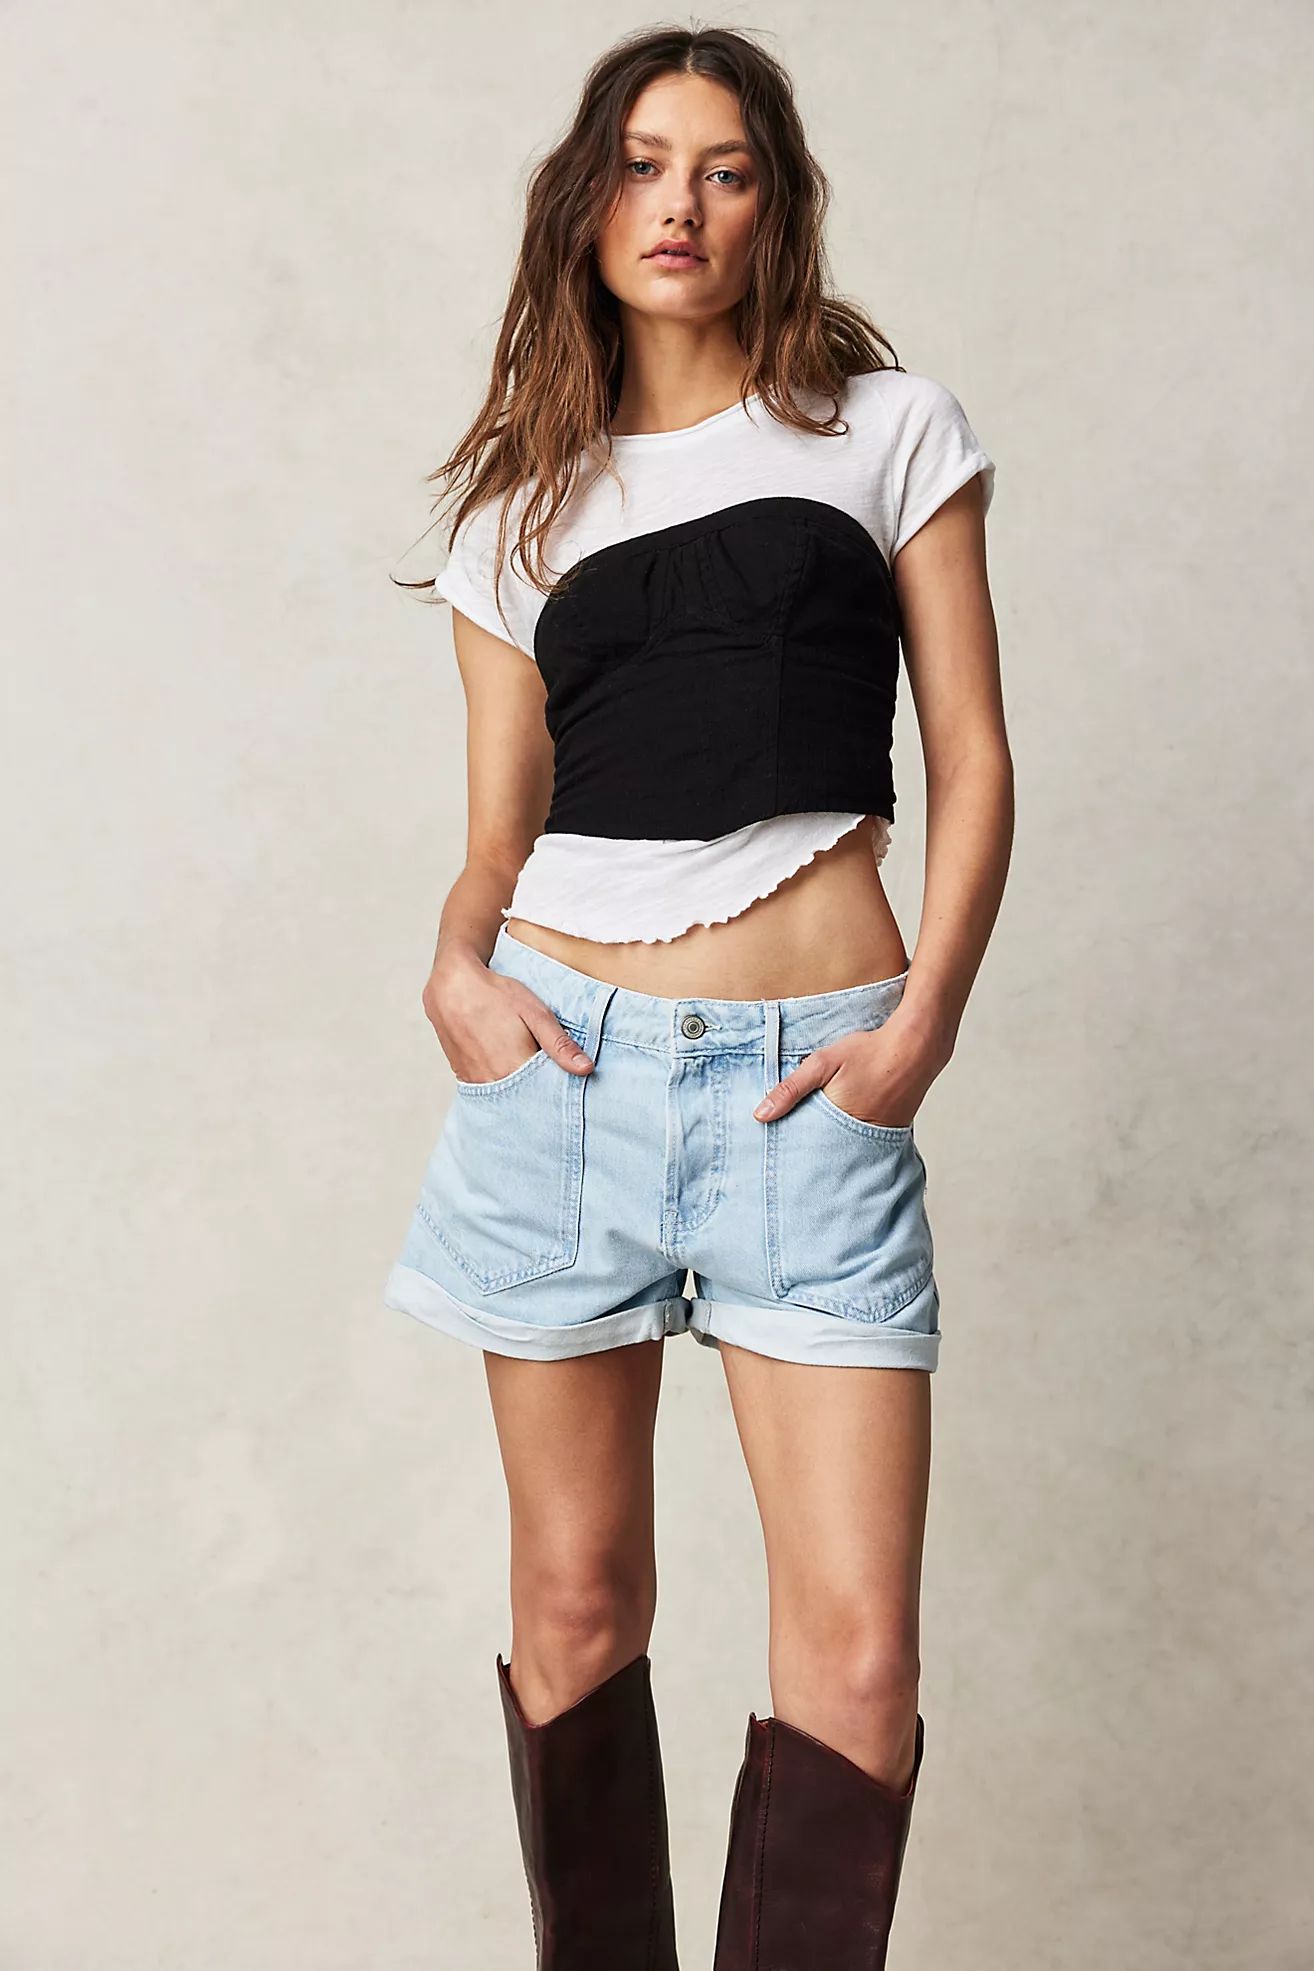 Beginner's Luck Slouch Shorts | Free People (UK)